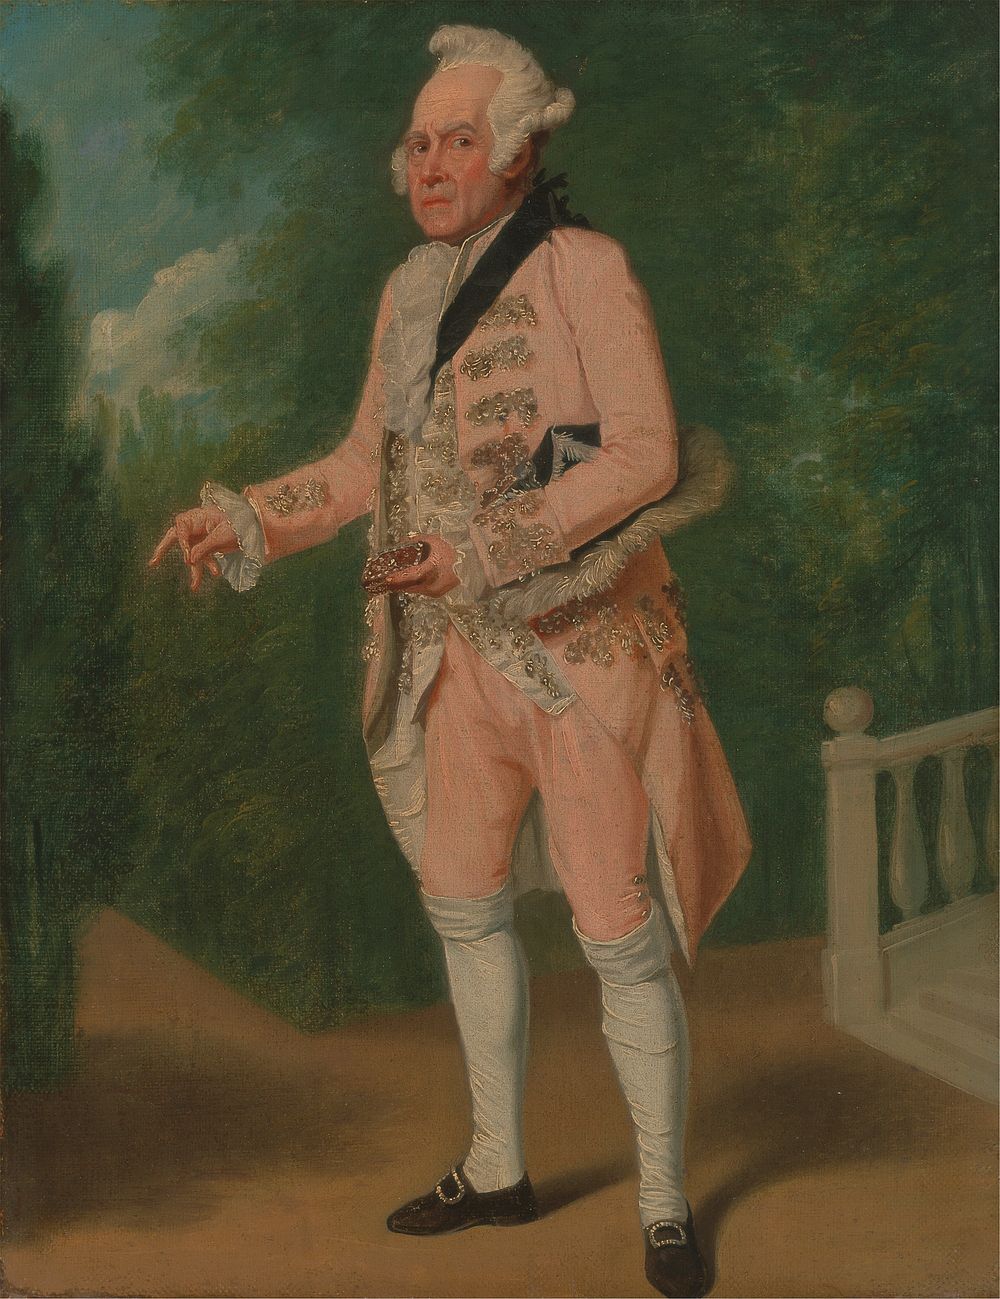 Thomas King in "The Clandestine Marriage" by George Colman and David Garrick